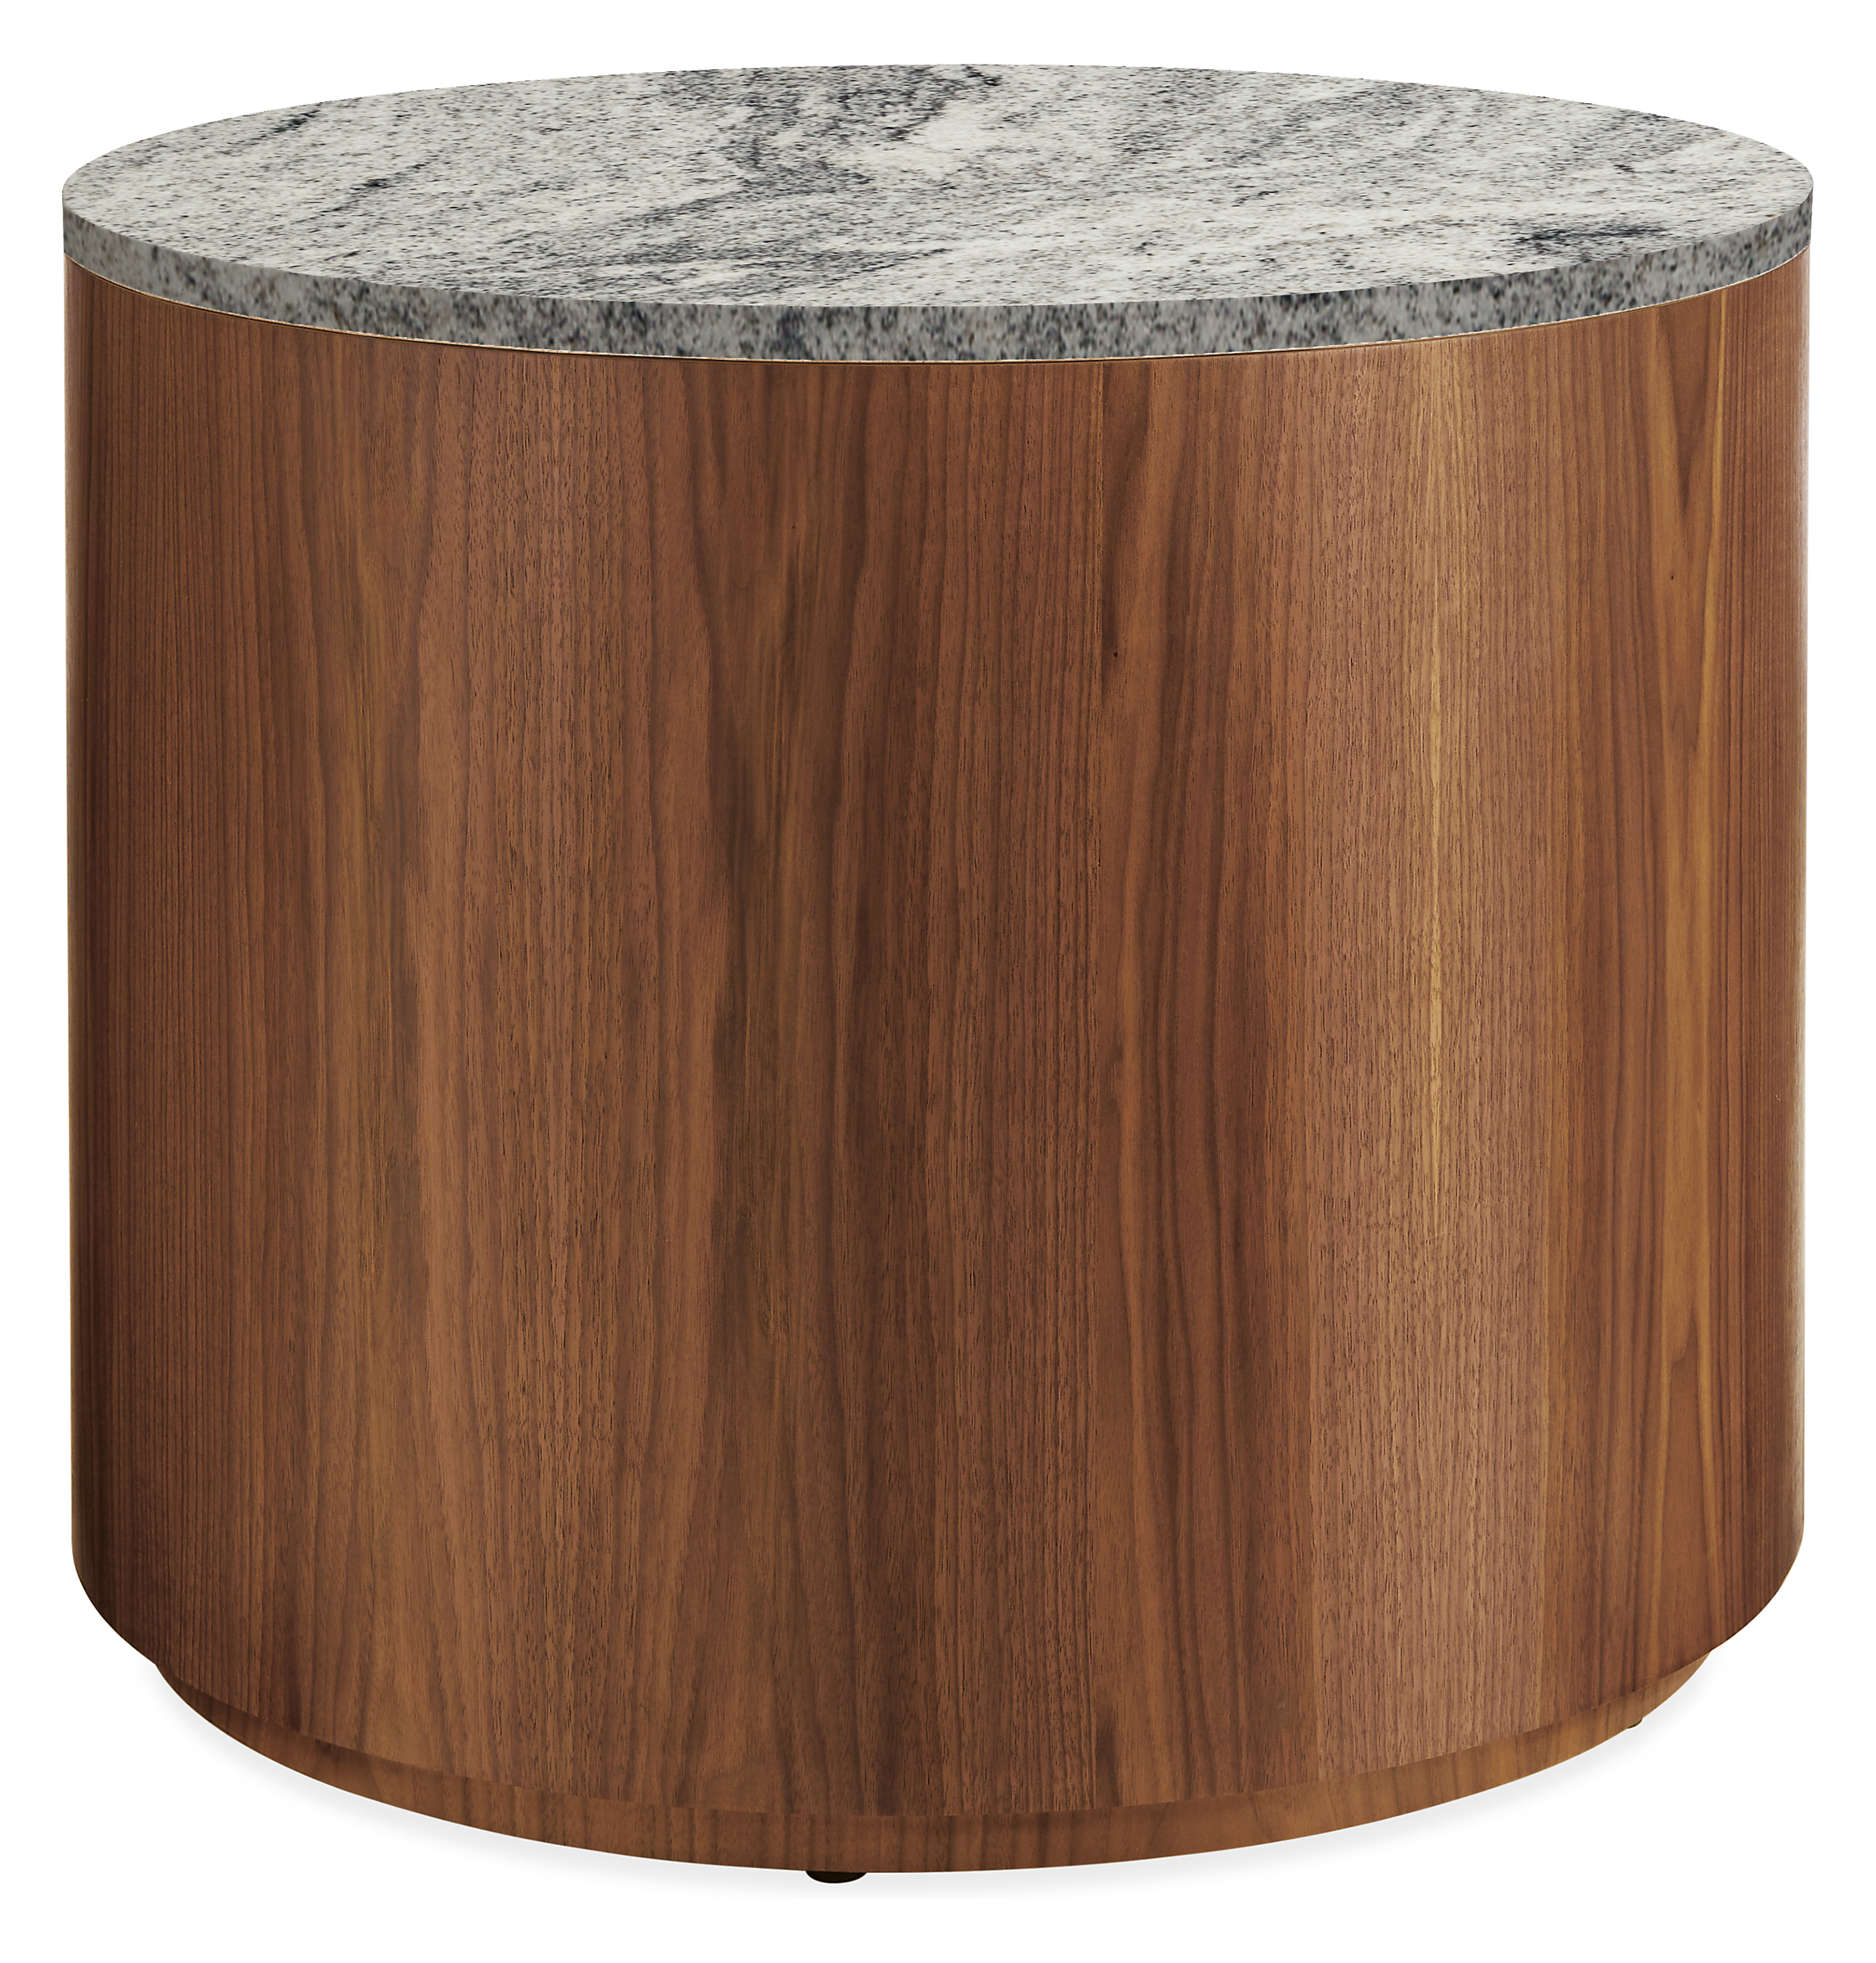 Liam 27 diam 22h Round End Table with Top Option